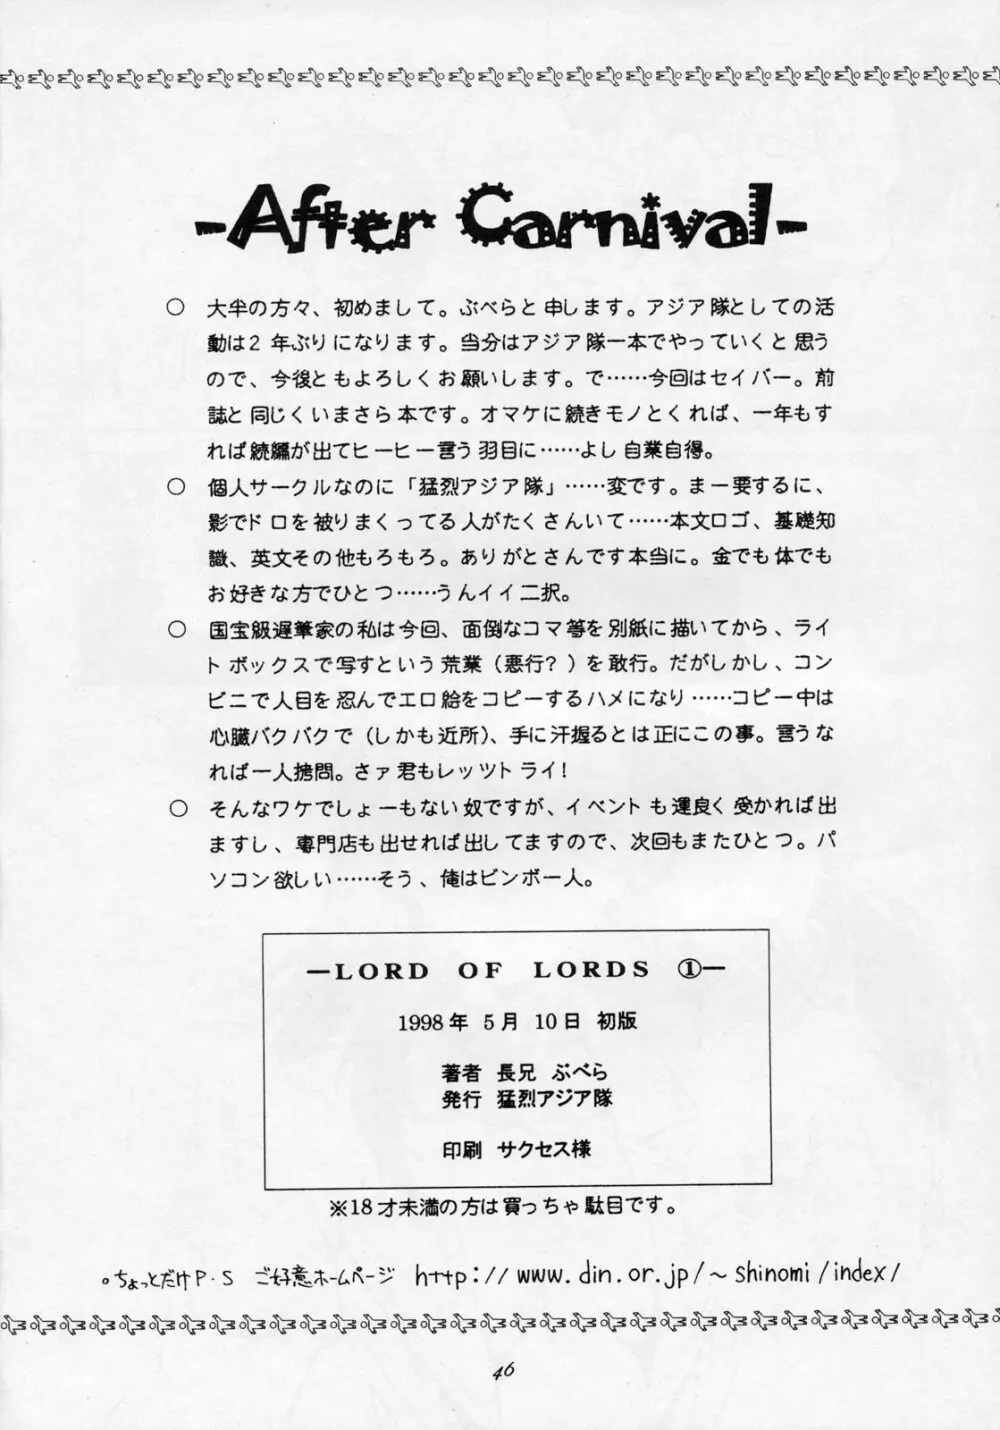 LORD OF LORDS vol.1 45ページ